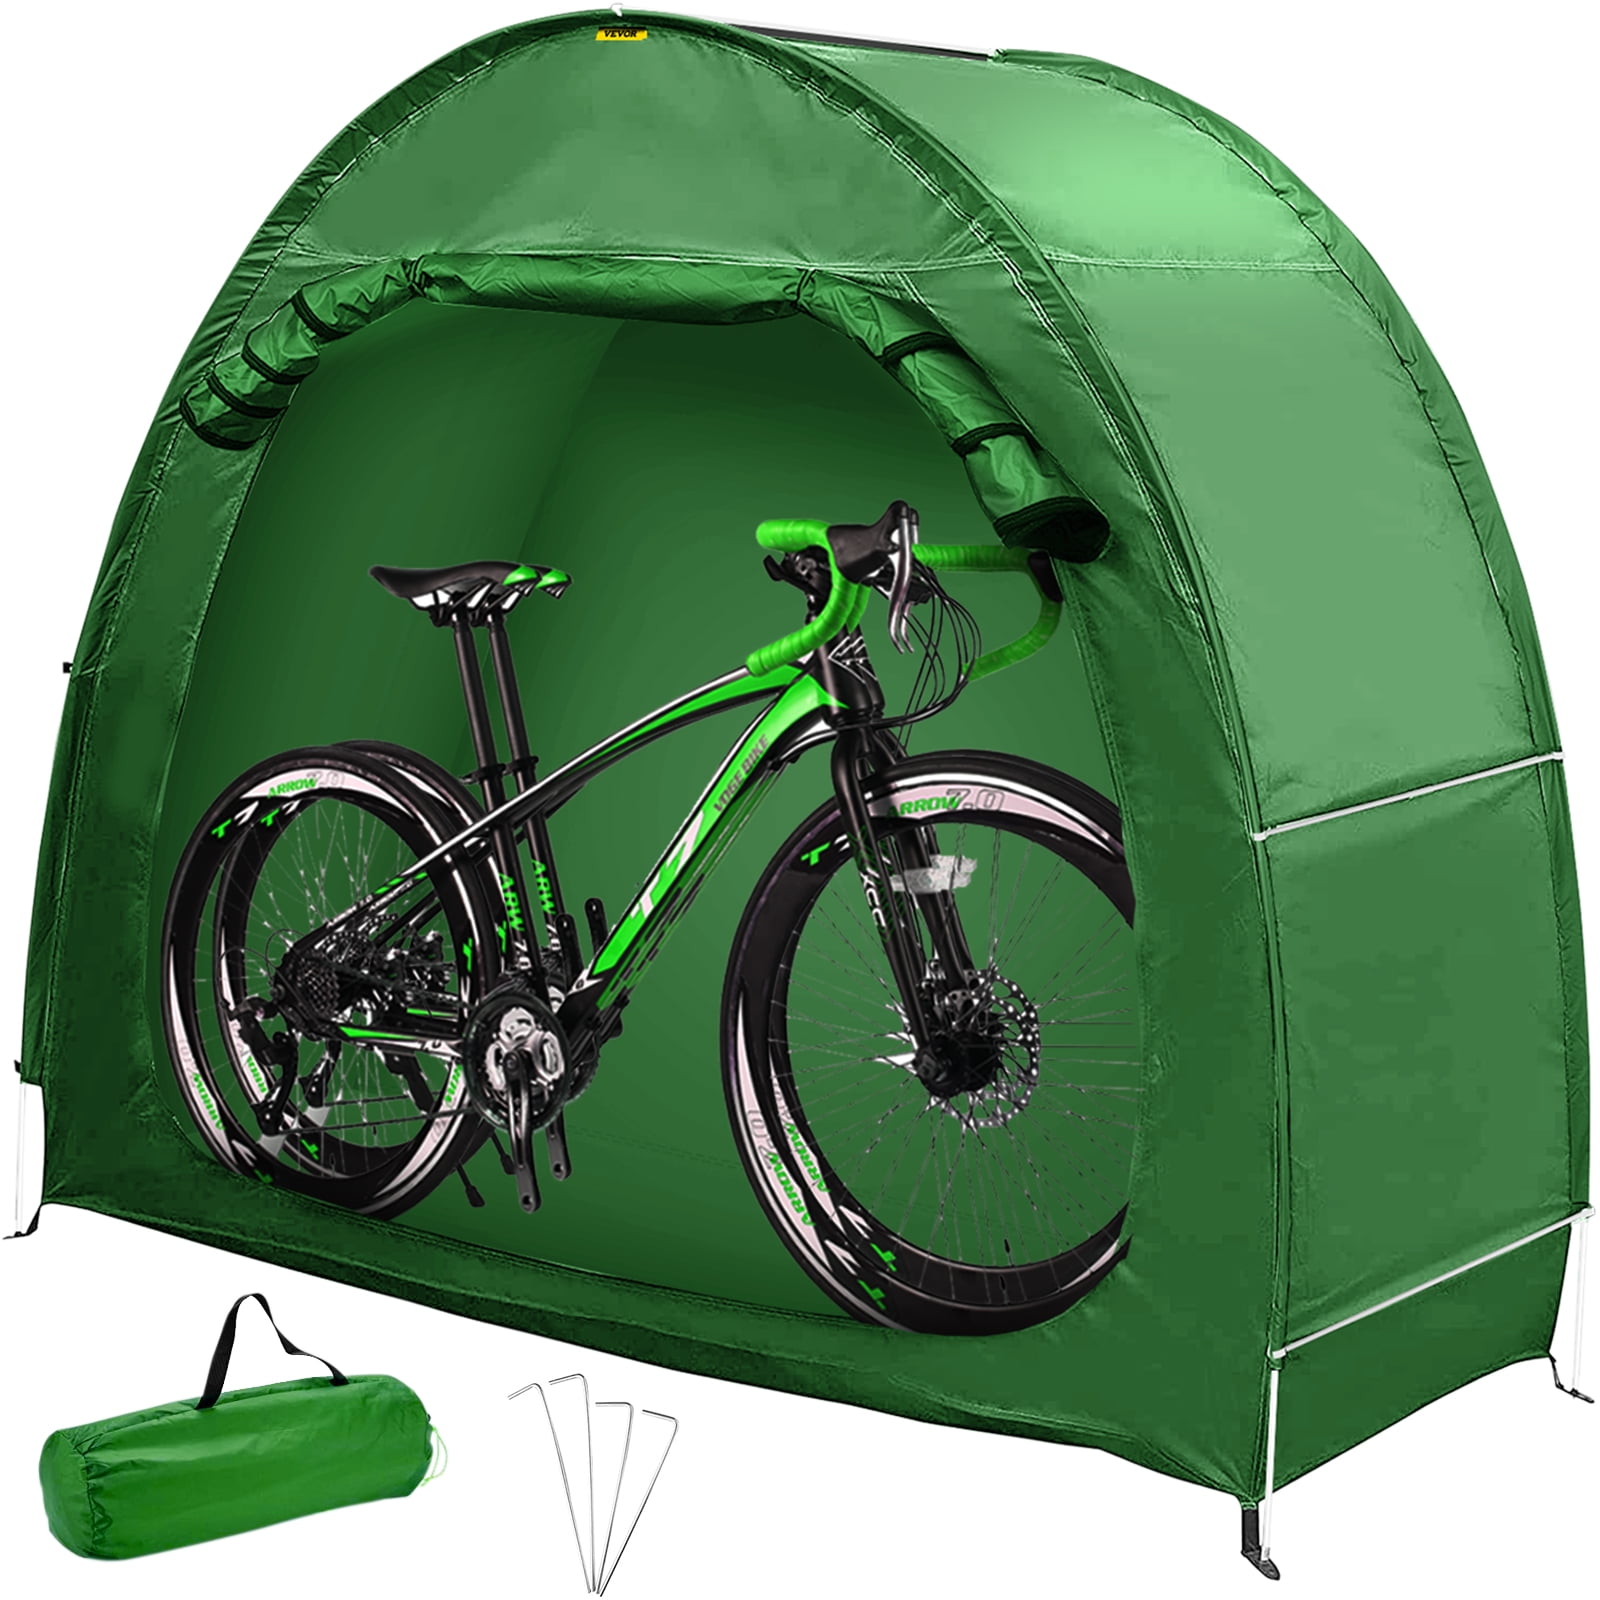 Aluminum Alloy Bracket with 4 Stakes YORIN Outdoor Bike Shed Storage Tent Cover Waterproof Anti-Dust Portable Foldable Tools for 4 Bicycles or 2 Tricycles 210D Oxford Cloth 